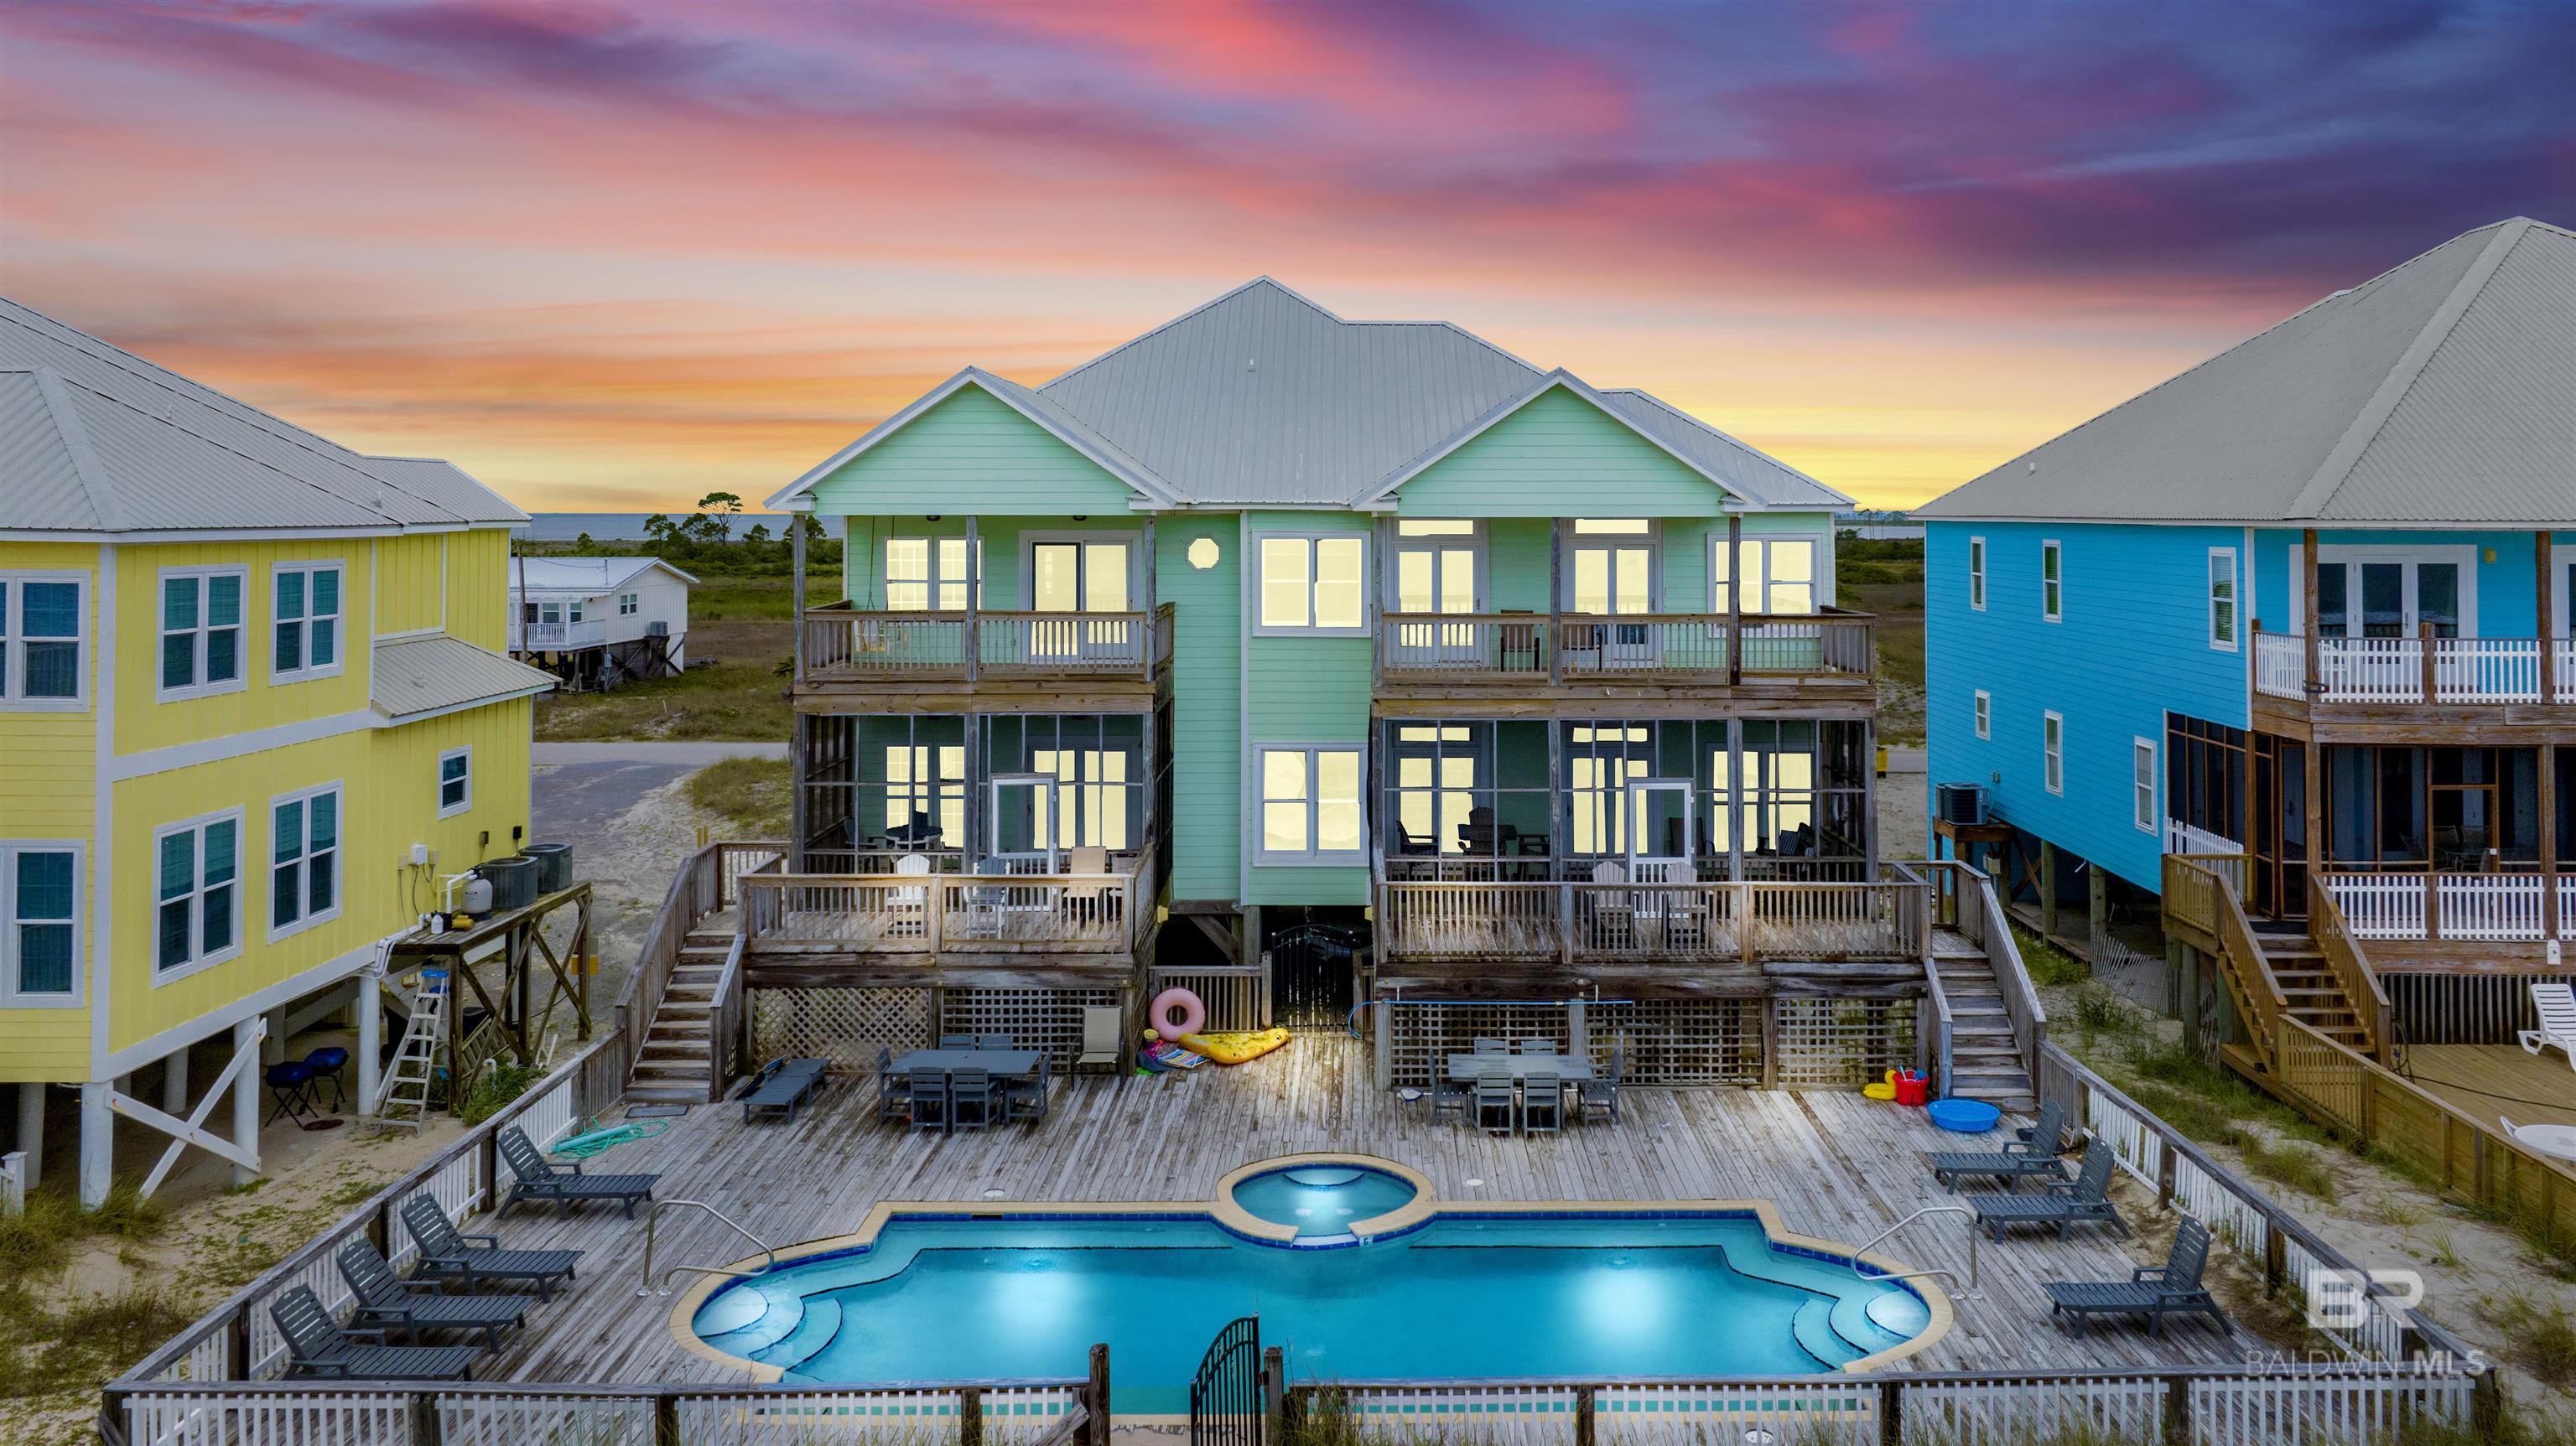 If you are looking for a vacation home for large families or if you're looking for an investment property, look no further than Beachside on Fort Morgan. Beachside is a large 11 bedroom, 7 bath house that is over 7,000 SF, has a private pool, and sits directly on the white sandy beaches overlooking the crystal blue water of the Gulf of Mexico. This is a Condo'd duplex that is offered as a single property.  MLS only allows one PPIN per listing.  This listing includes PPIN 237241 and 237242.  Owners have options to do what they wish. Rented separately or as one, sell a side, etc.  Rentals for 2022 exceeded 300K.  Take away the owner stays and gifts to family, pushing $400,000 in gross rental revenue. This home sleeps up to 40 so please allow time for showing requests and it is best to show between turn arounds during Summer (Saturdays, between 10 am and 4 pm). All information, measurements, details, etc. are to be deemed reliable and to be verified by buyers' and/or buyers' agents.